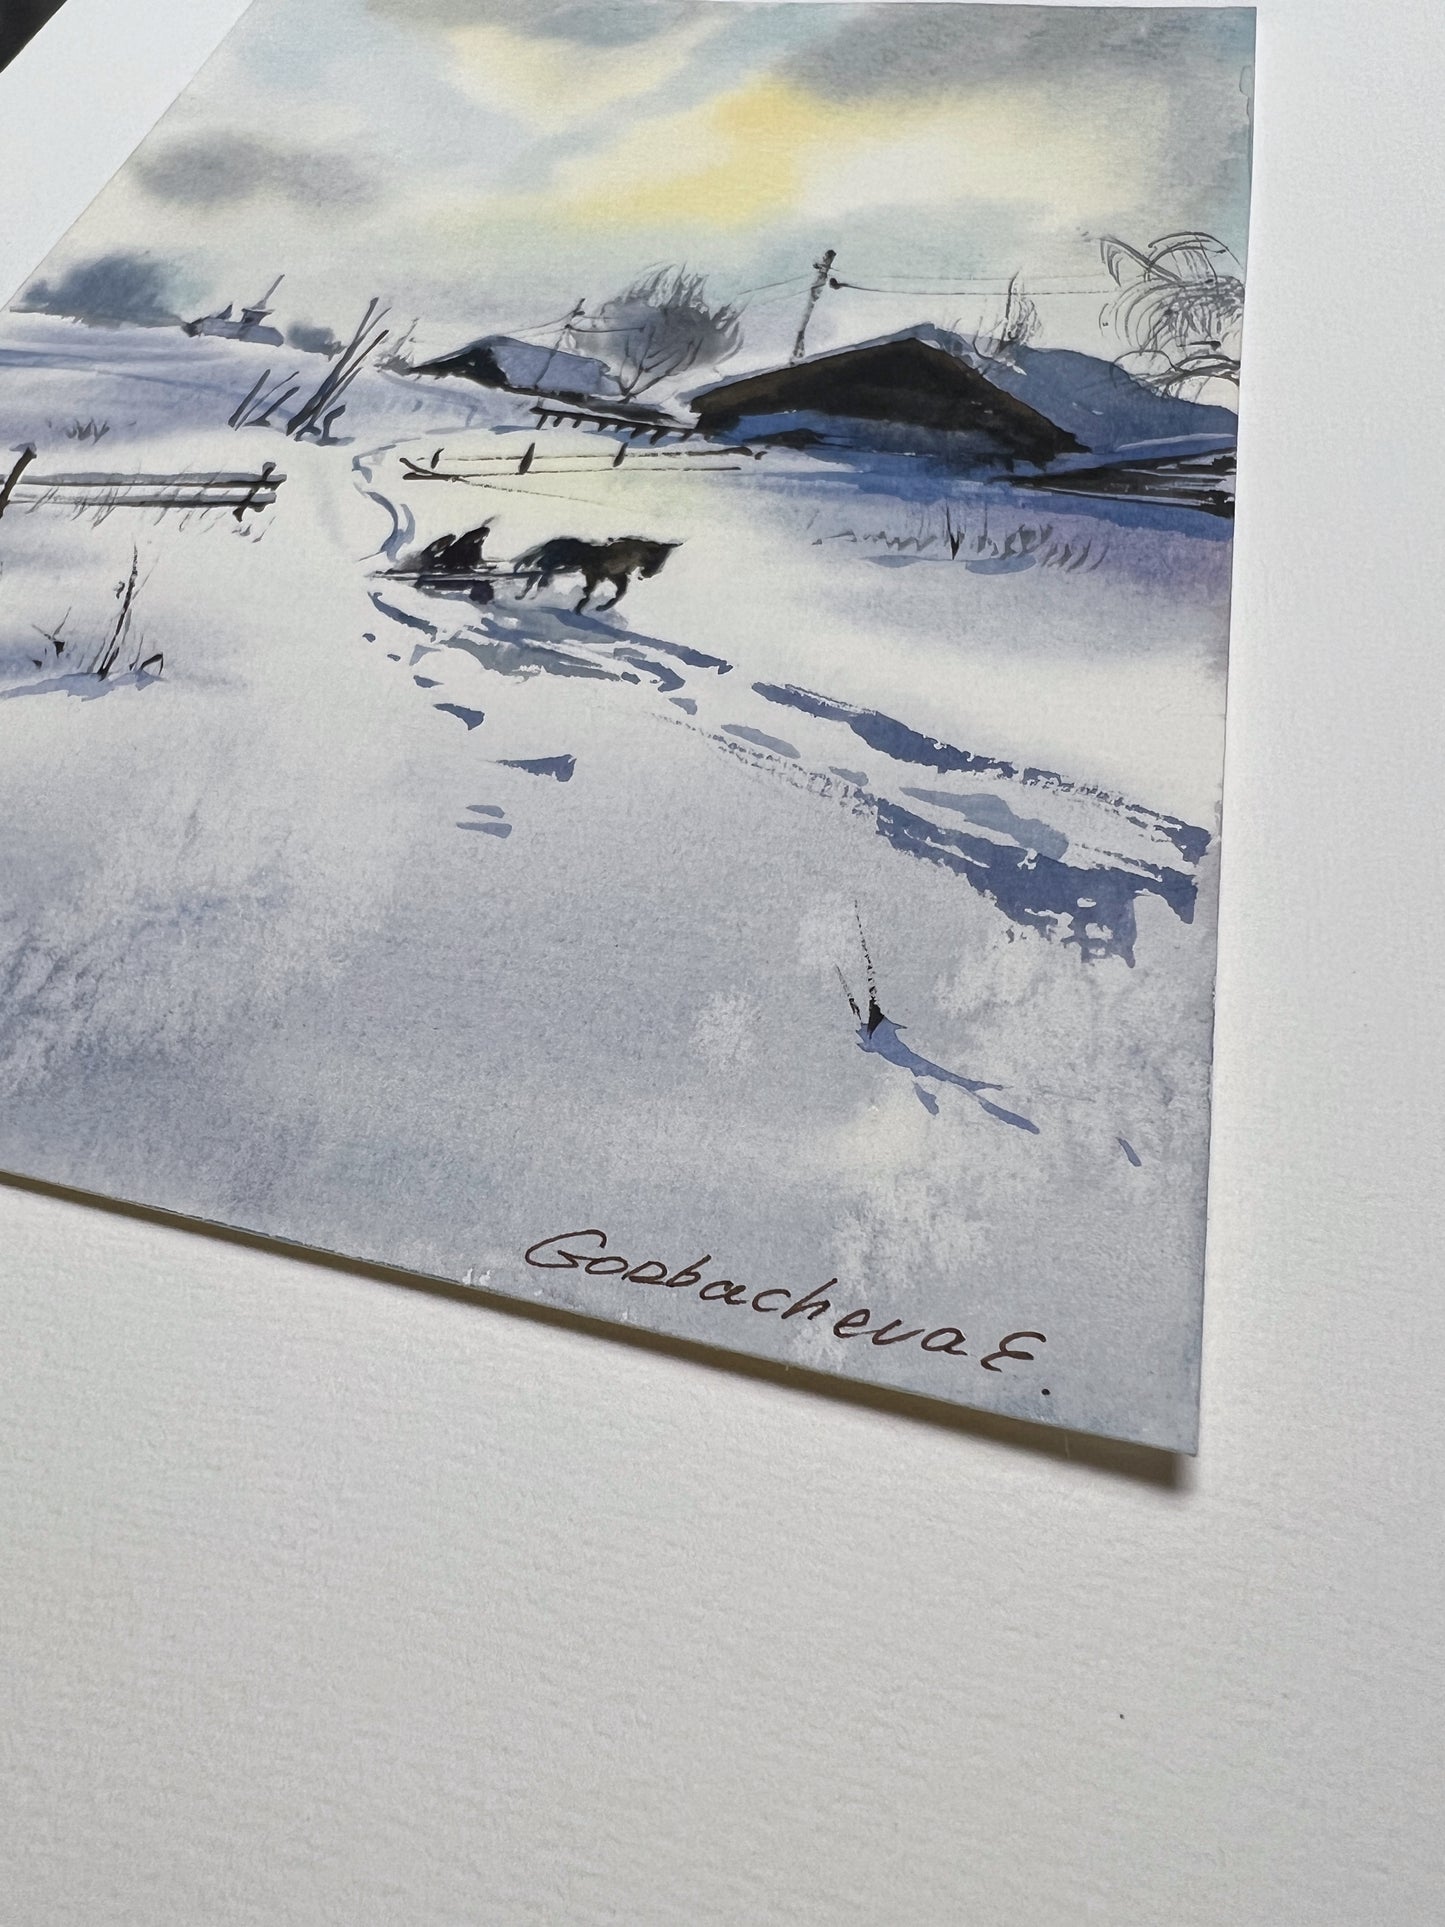 Rustic Winter Small Painting, Original Watercolor Artwork, Christmas Morning, Art Lover Gift & Wall Decor, Landscape